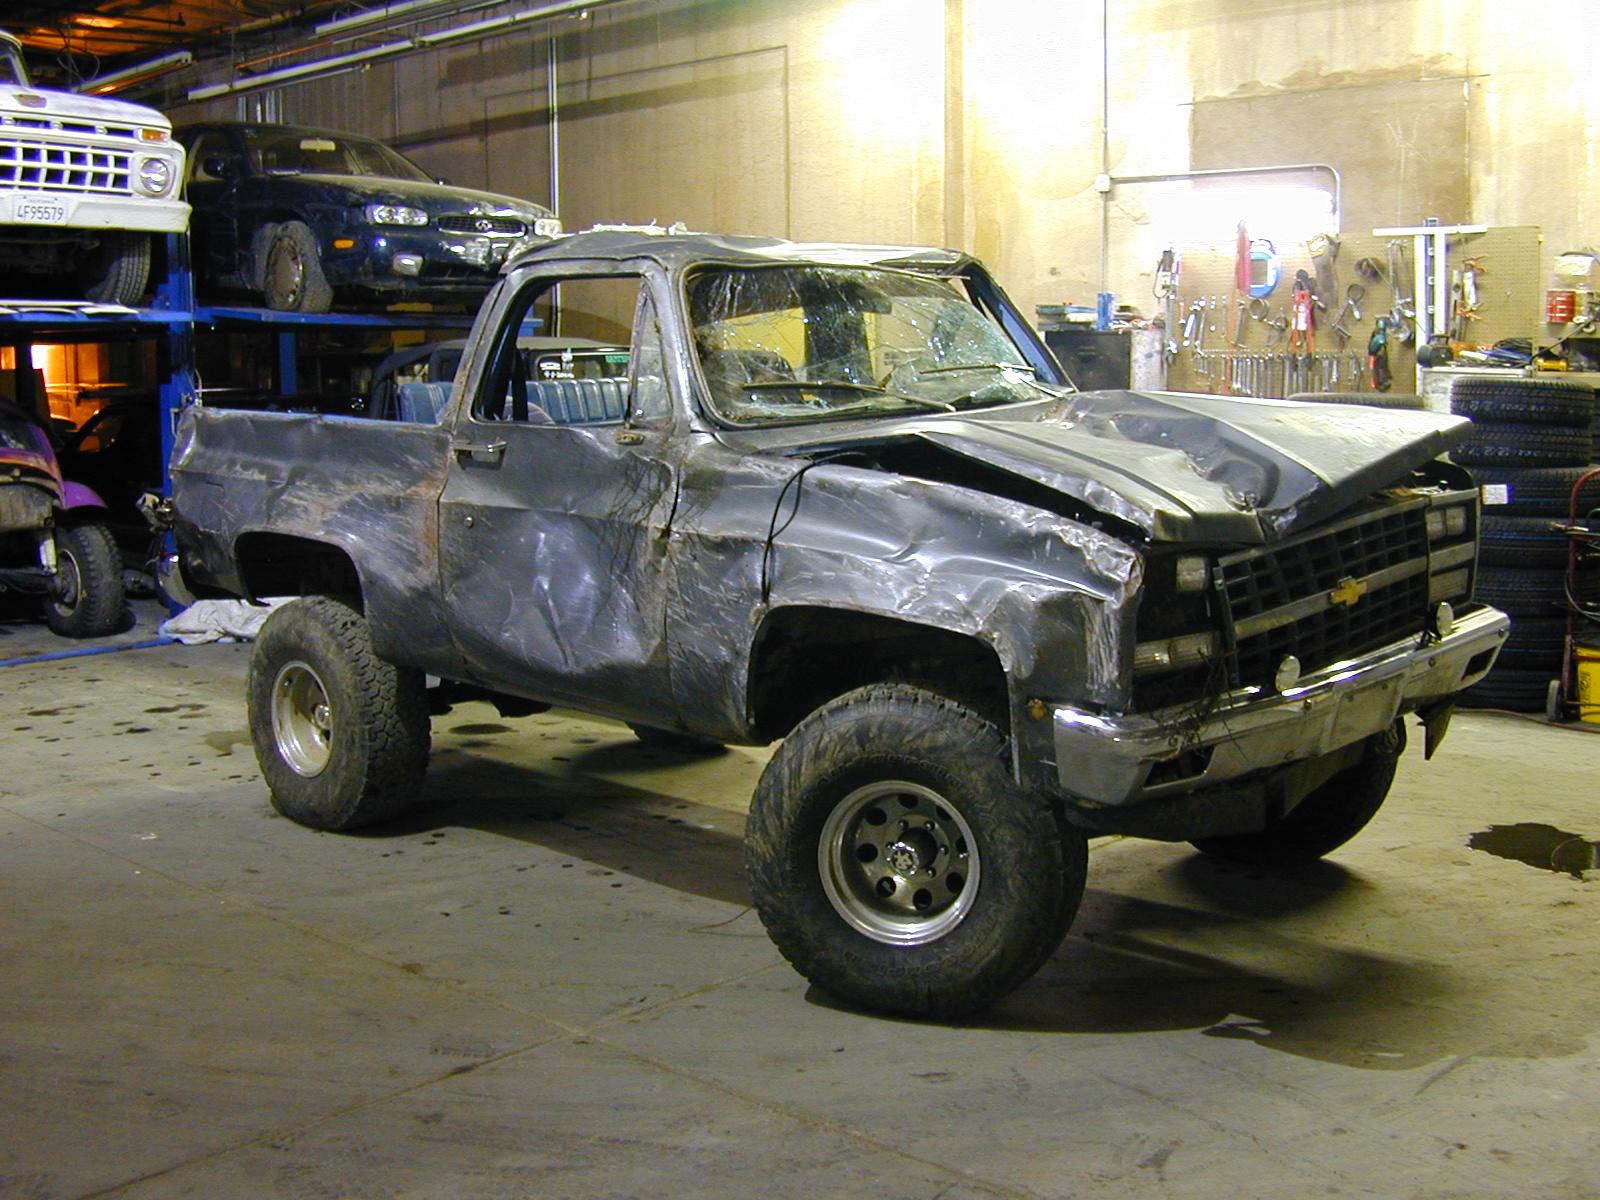 The Banged Up Chevy Blazer That Pierce Brosnans 13 Year Old Son Was Seriously Injured In After A Early Morning Crash April 22, 2000 Sits In A Garage In Malibu, California. Sean Brosnan, The Actors Son, Was Flown To The Ucla Medical Center. | Source: Getty Images